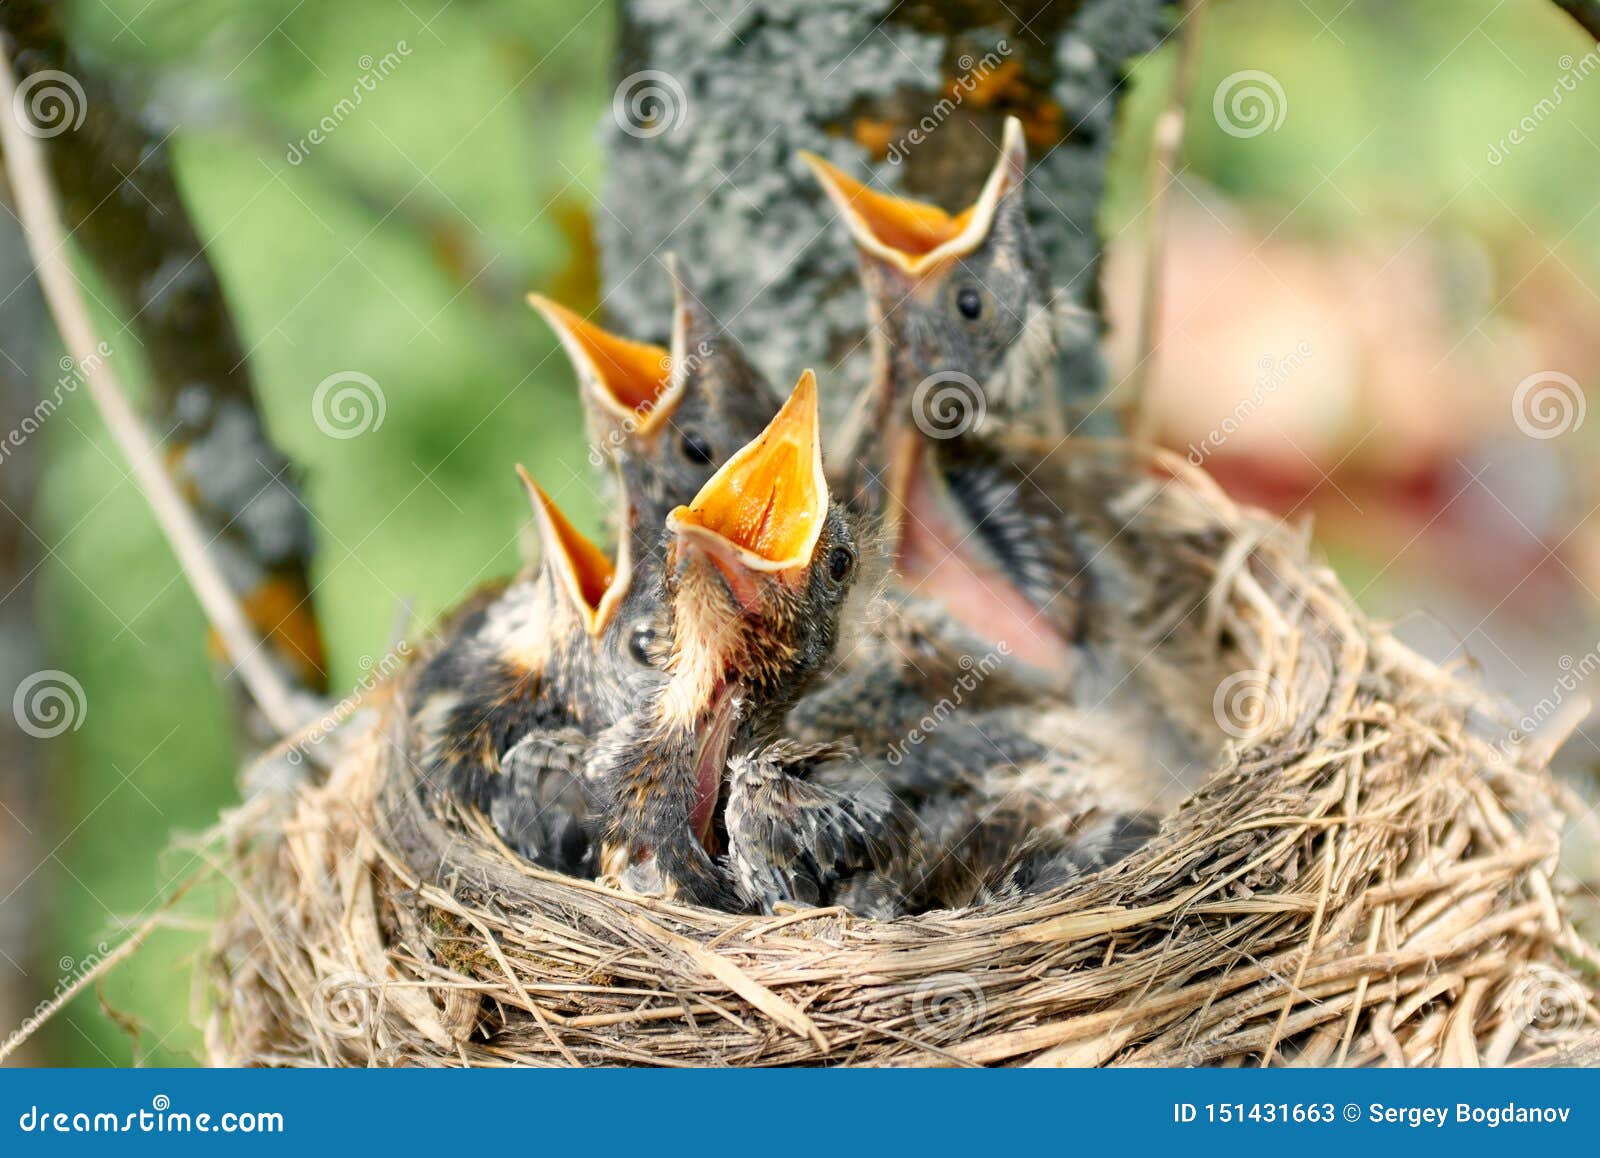 Download Baby birds in nest stock image. Image of outdoor, mouth - 151431663